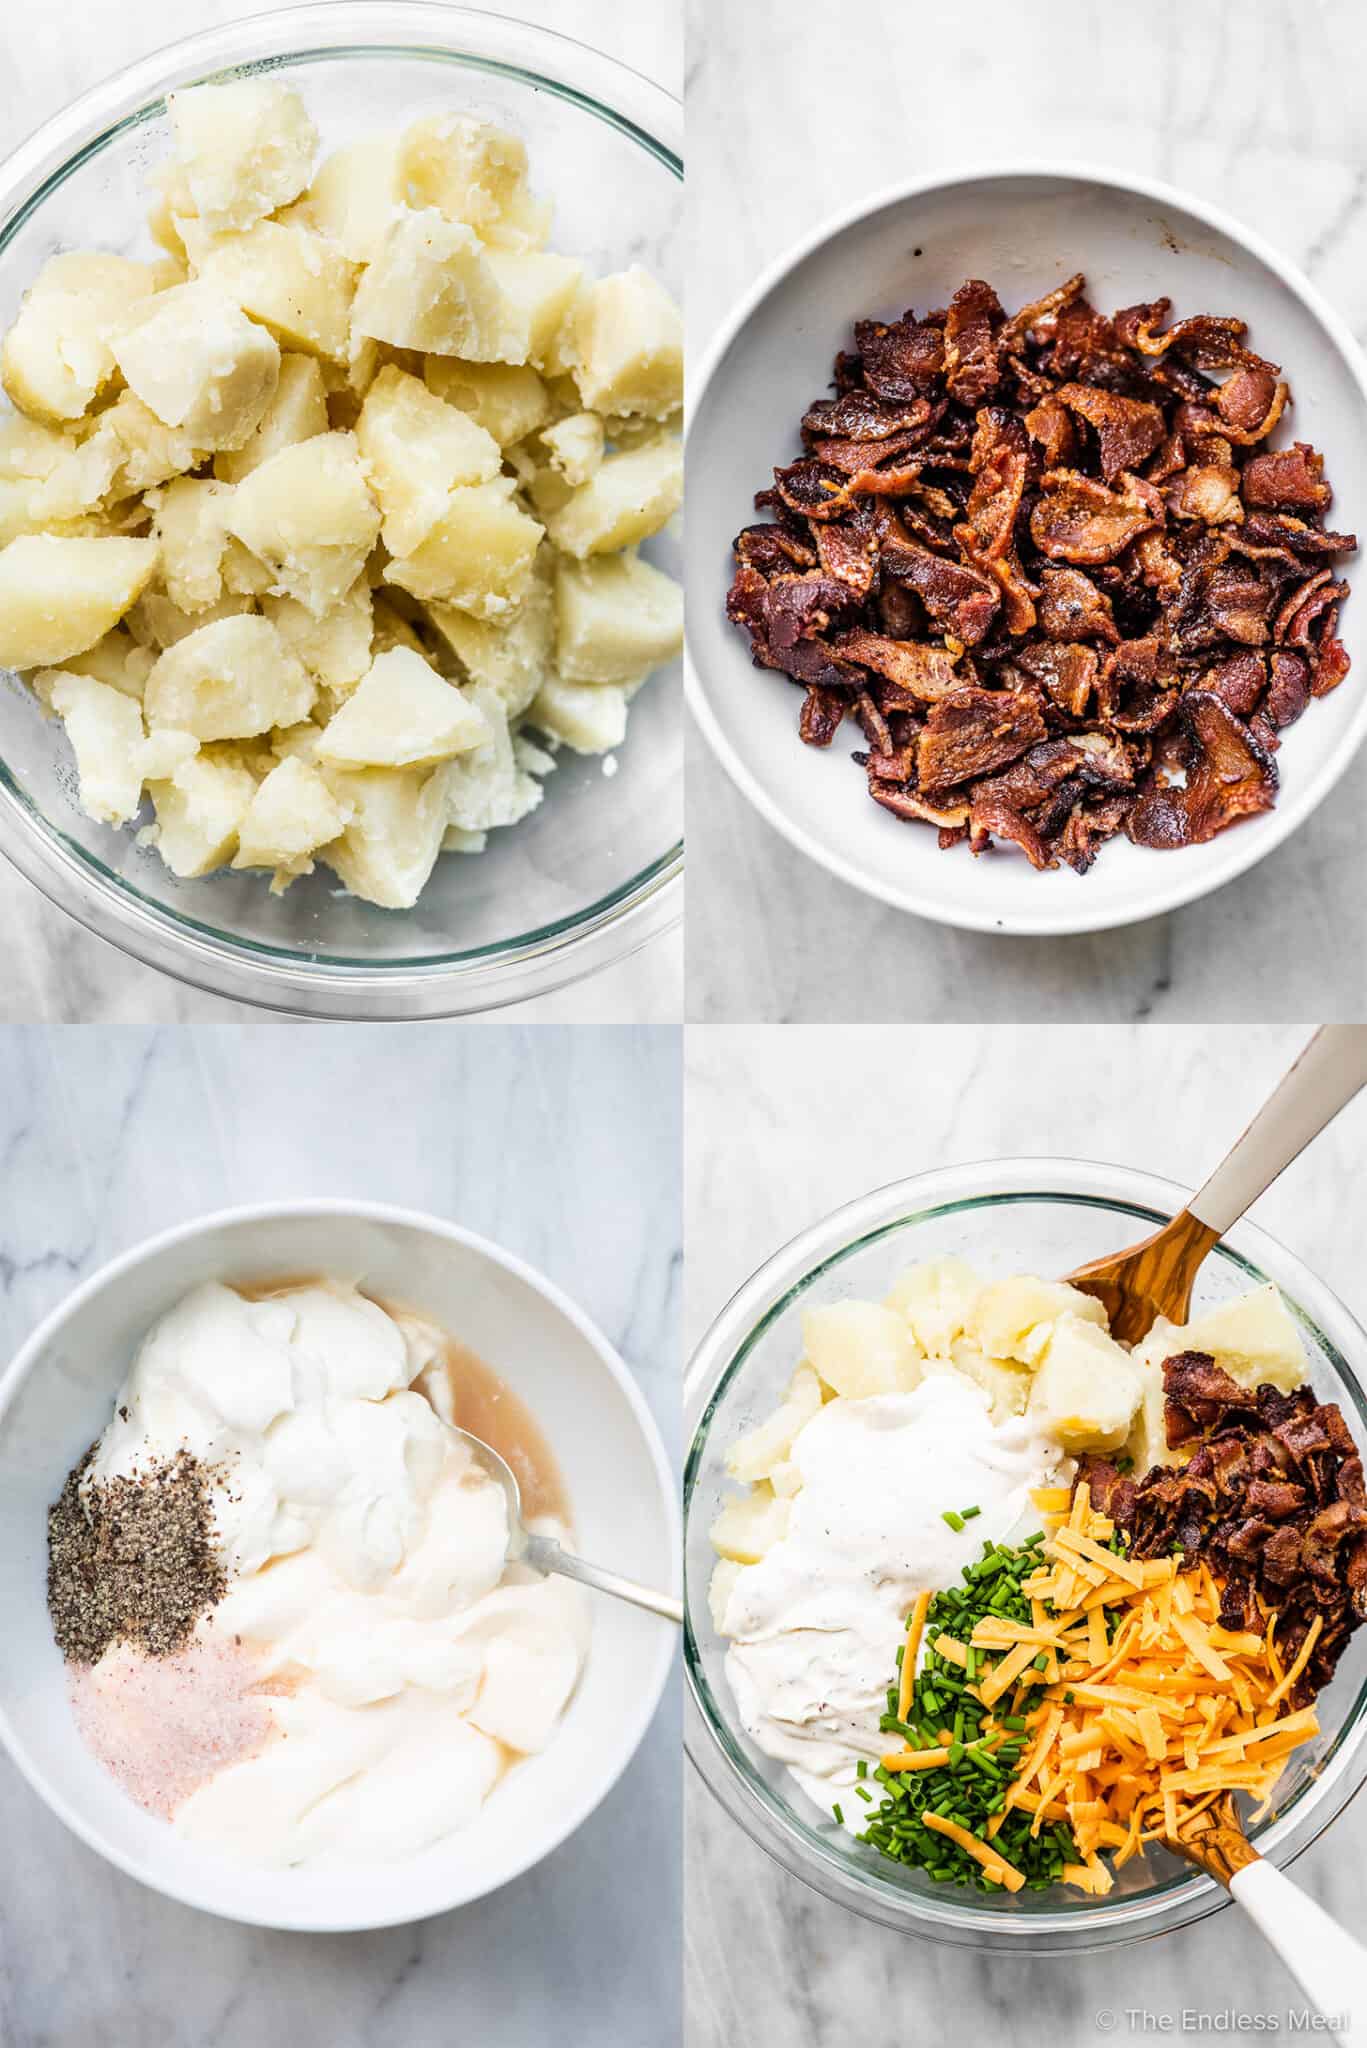 4 pictures showing how to make this baked potato salad recipe.